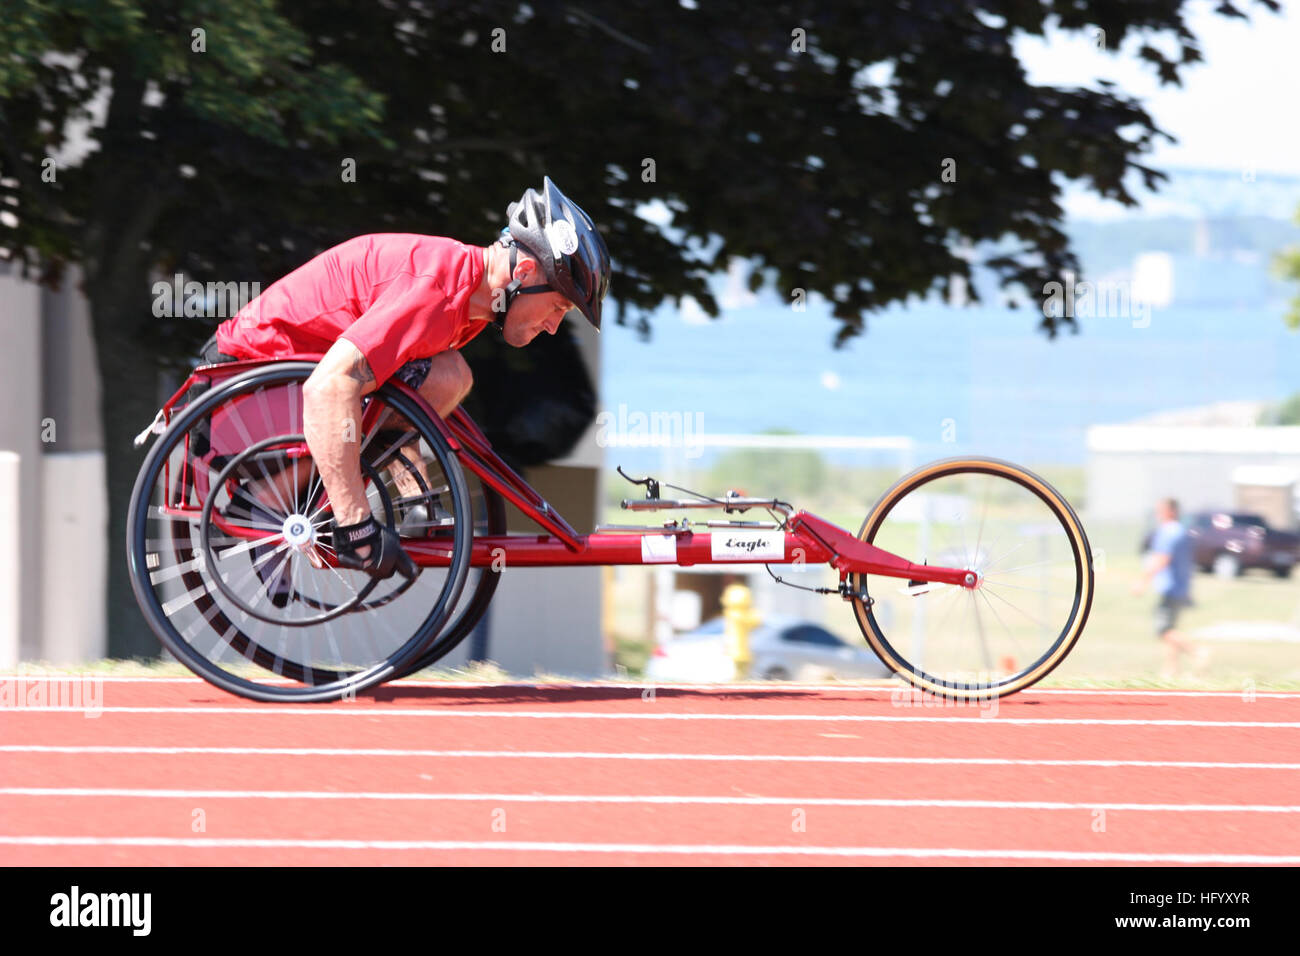 110716-N-CQ678-001 NEWPORT, R.I. (July 16, 2011) Former Marine Corps Sgt. Tim Connor, one of 59 Paralympic military athletes, practices sprints in a racing wheelchair on McCool Memorial Track during the 2011 U.S. Olympic Committee Paralympic Military Sports Camp at Naval Station Newport. (U.S. Navy photo by Lisa Rama/Released) US Navy 110716-N-CQ678-001 Former Marine Corps Sgt. Tim Connor, one of 59 Paralympic military athletes, practices sprints in a racing wheelchair Stock Photo